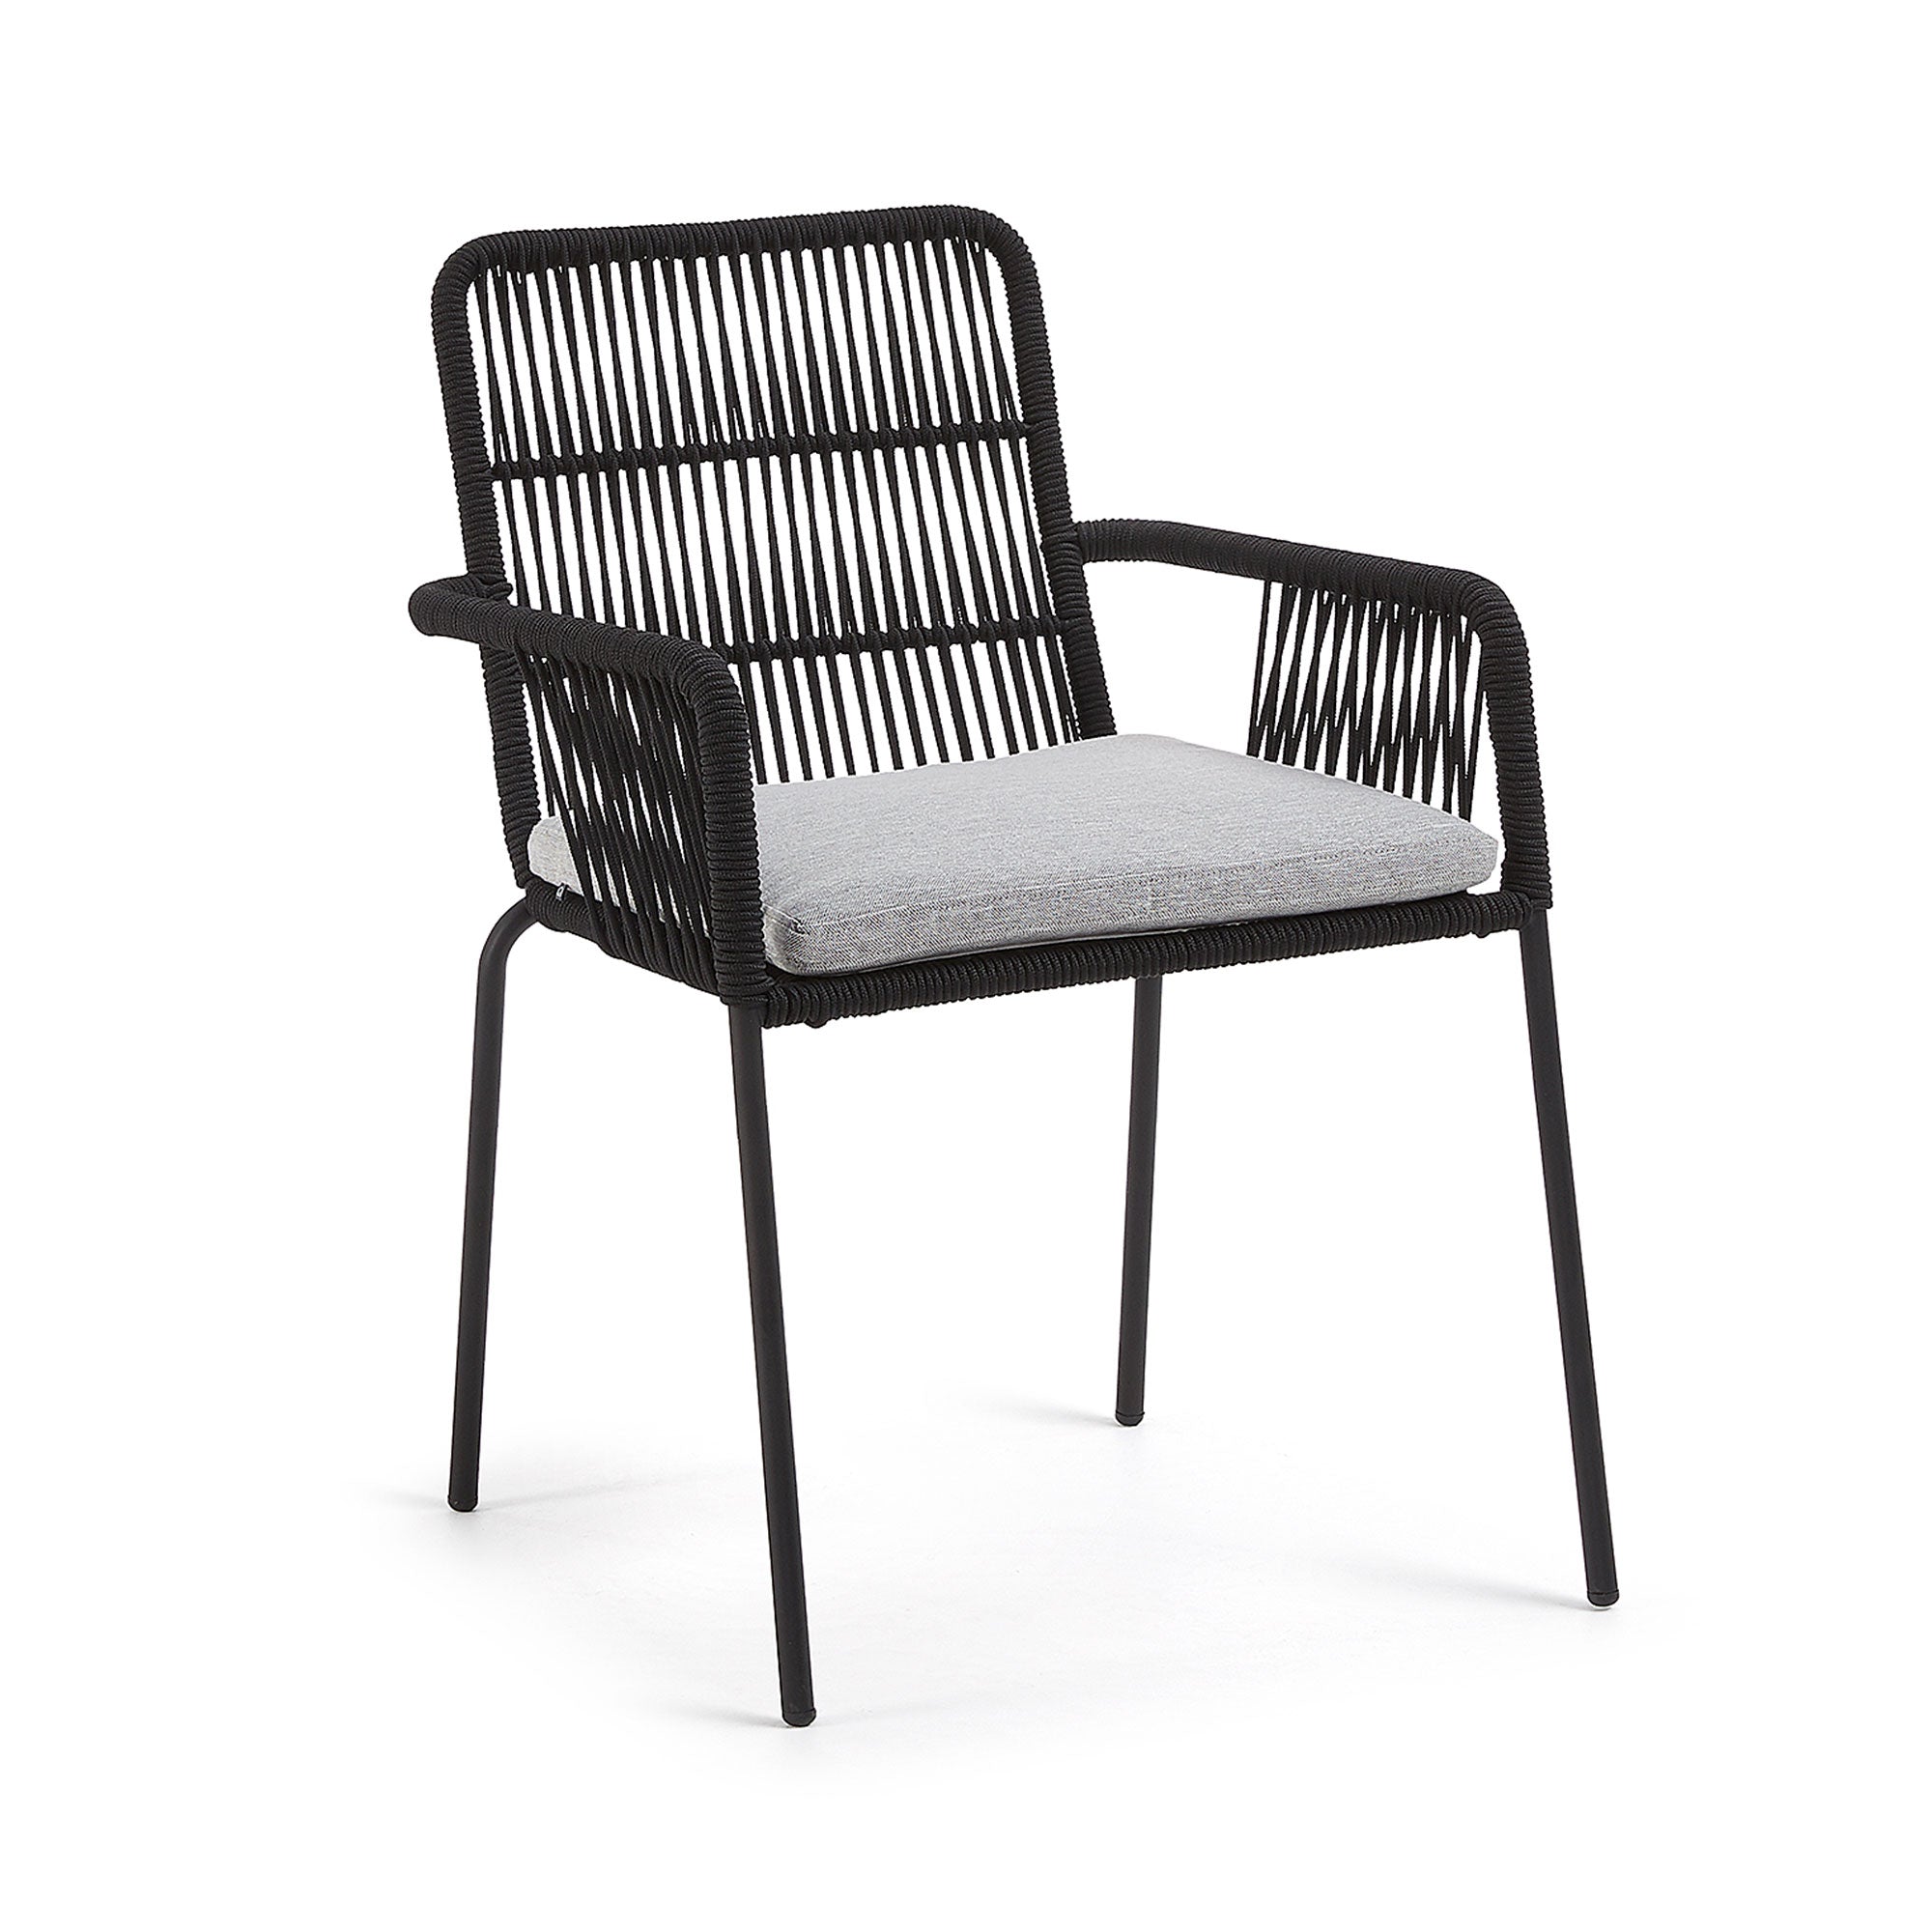 Samanta stackable chair made from black cord and galvanised steel legs.